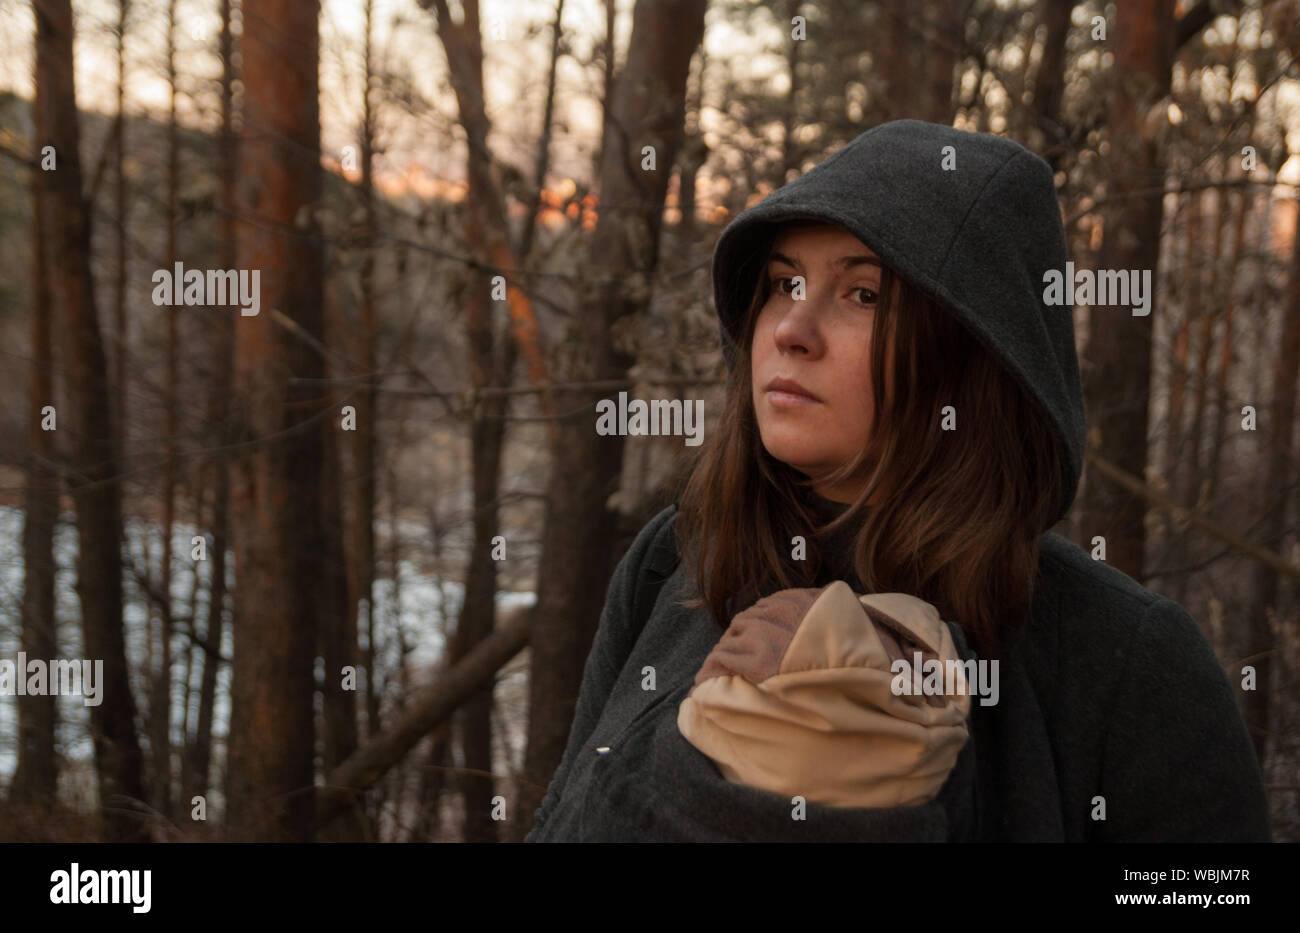 Woman With Baby In Sling Against Trees At Forest Stock Photo